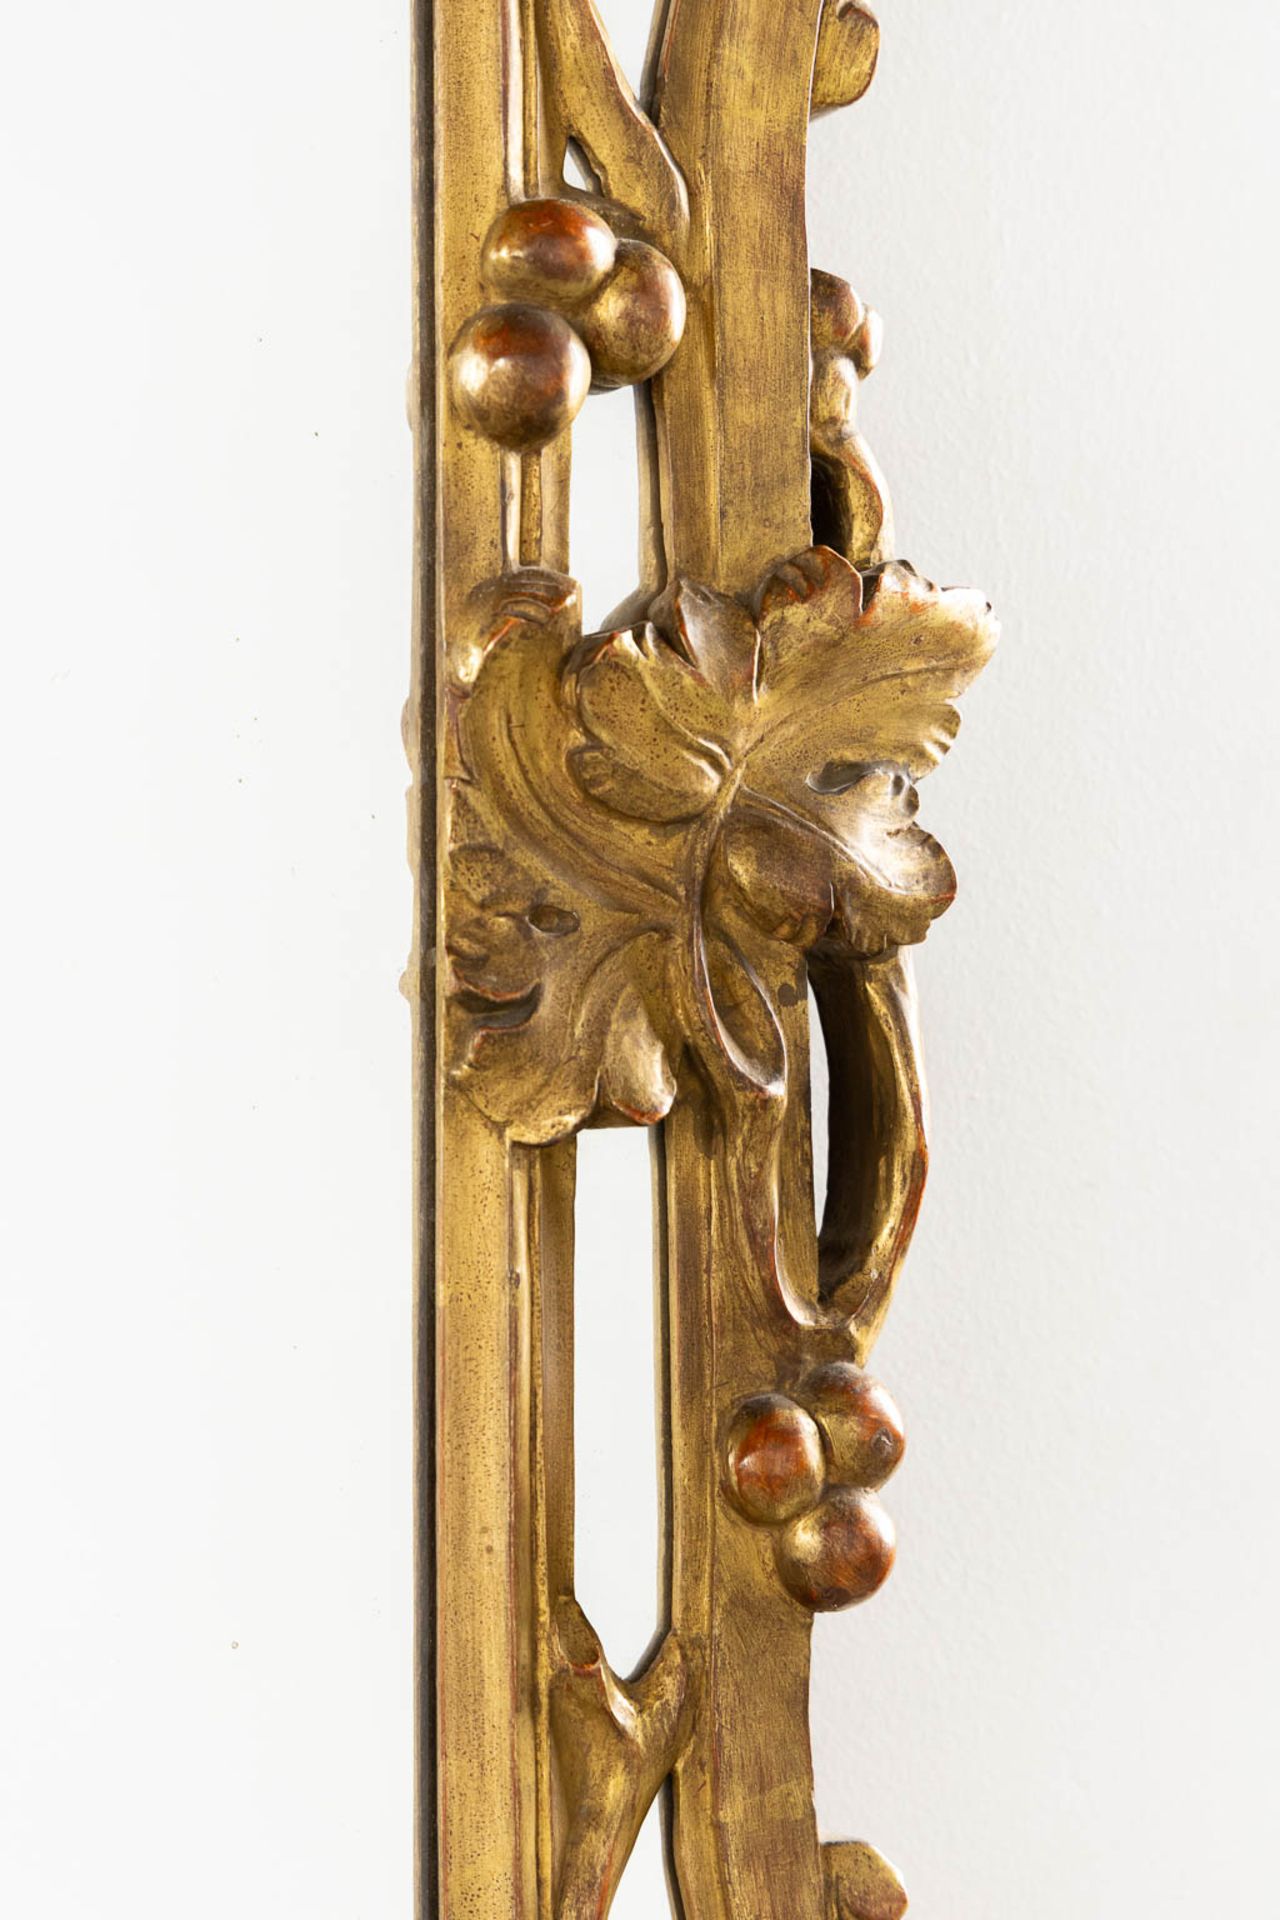 An antique, wood-sculptured and gilt mirror, France, 20th C. (W:74 x H:130 cm) - Image 4 of 7